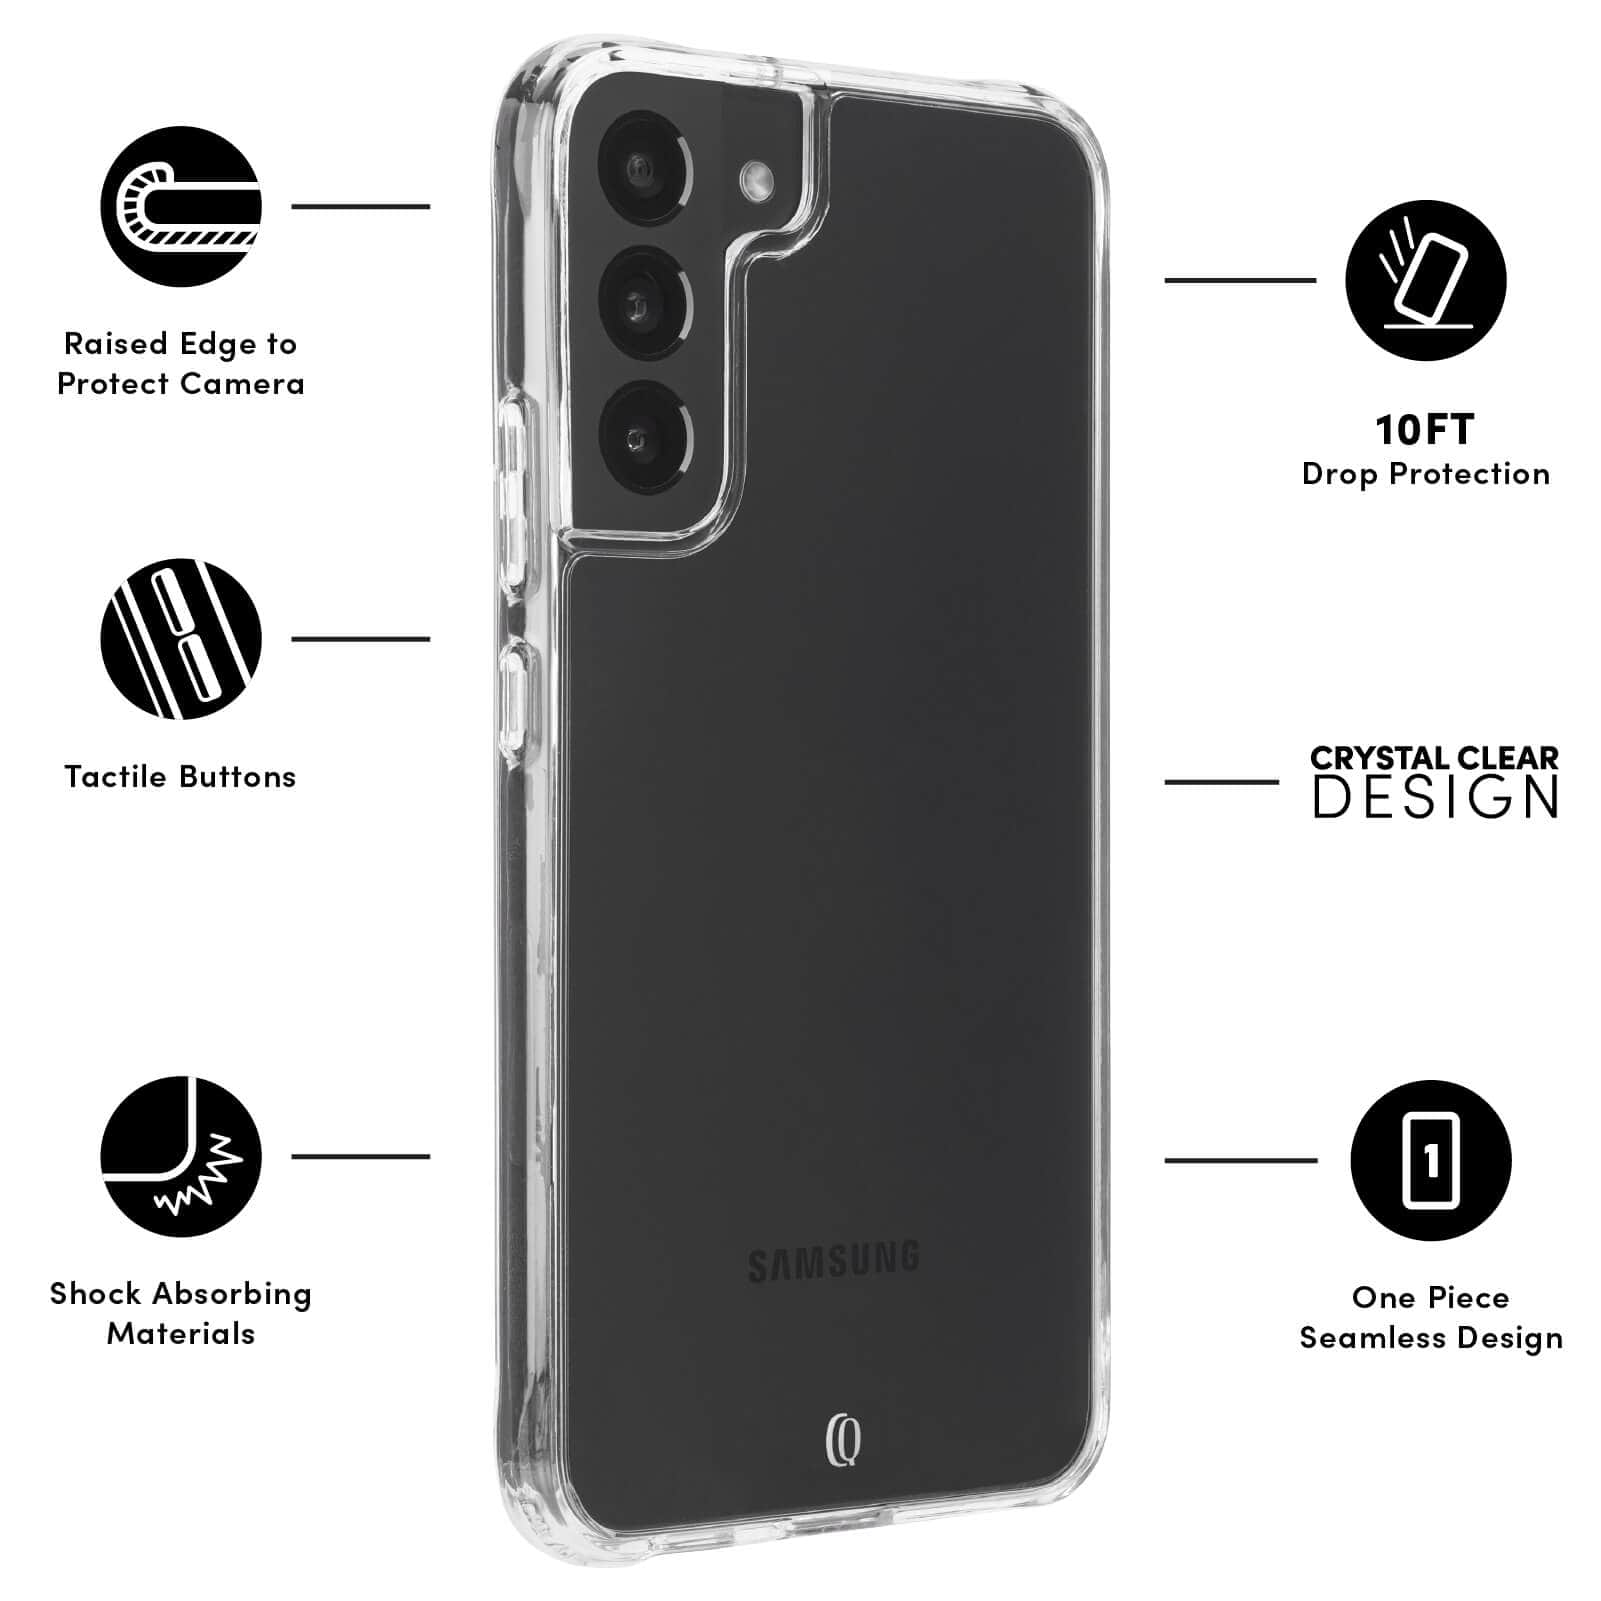 FEATURES: RAISED EDGE TO PROTECT CAMERA, TACTILE BUTTONS, SHOCK ABSORBING MATERIALS, 10FT DROP PROTECTION, CRYSTAL LEAR DESIGN, ONE PIECE SEAMLESS DESIGN. COLOR::CLEAR